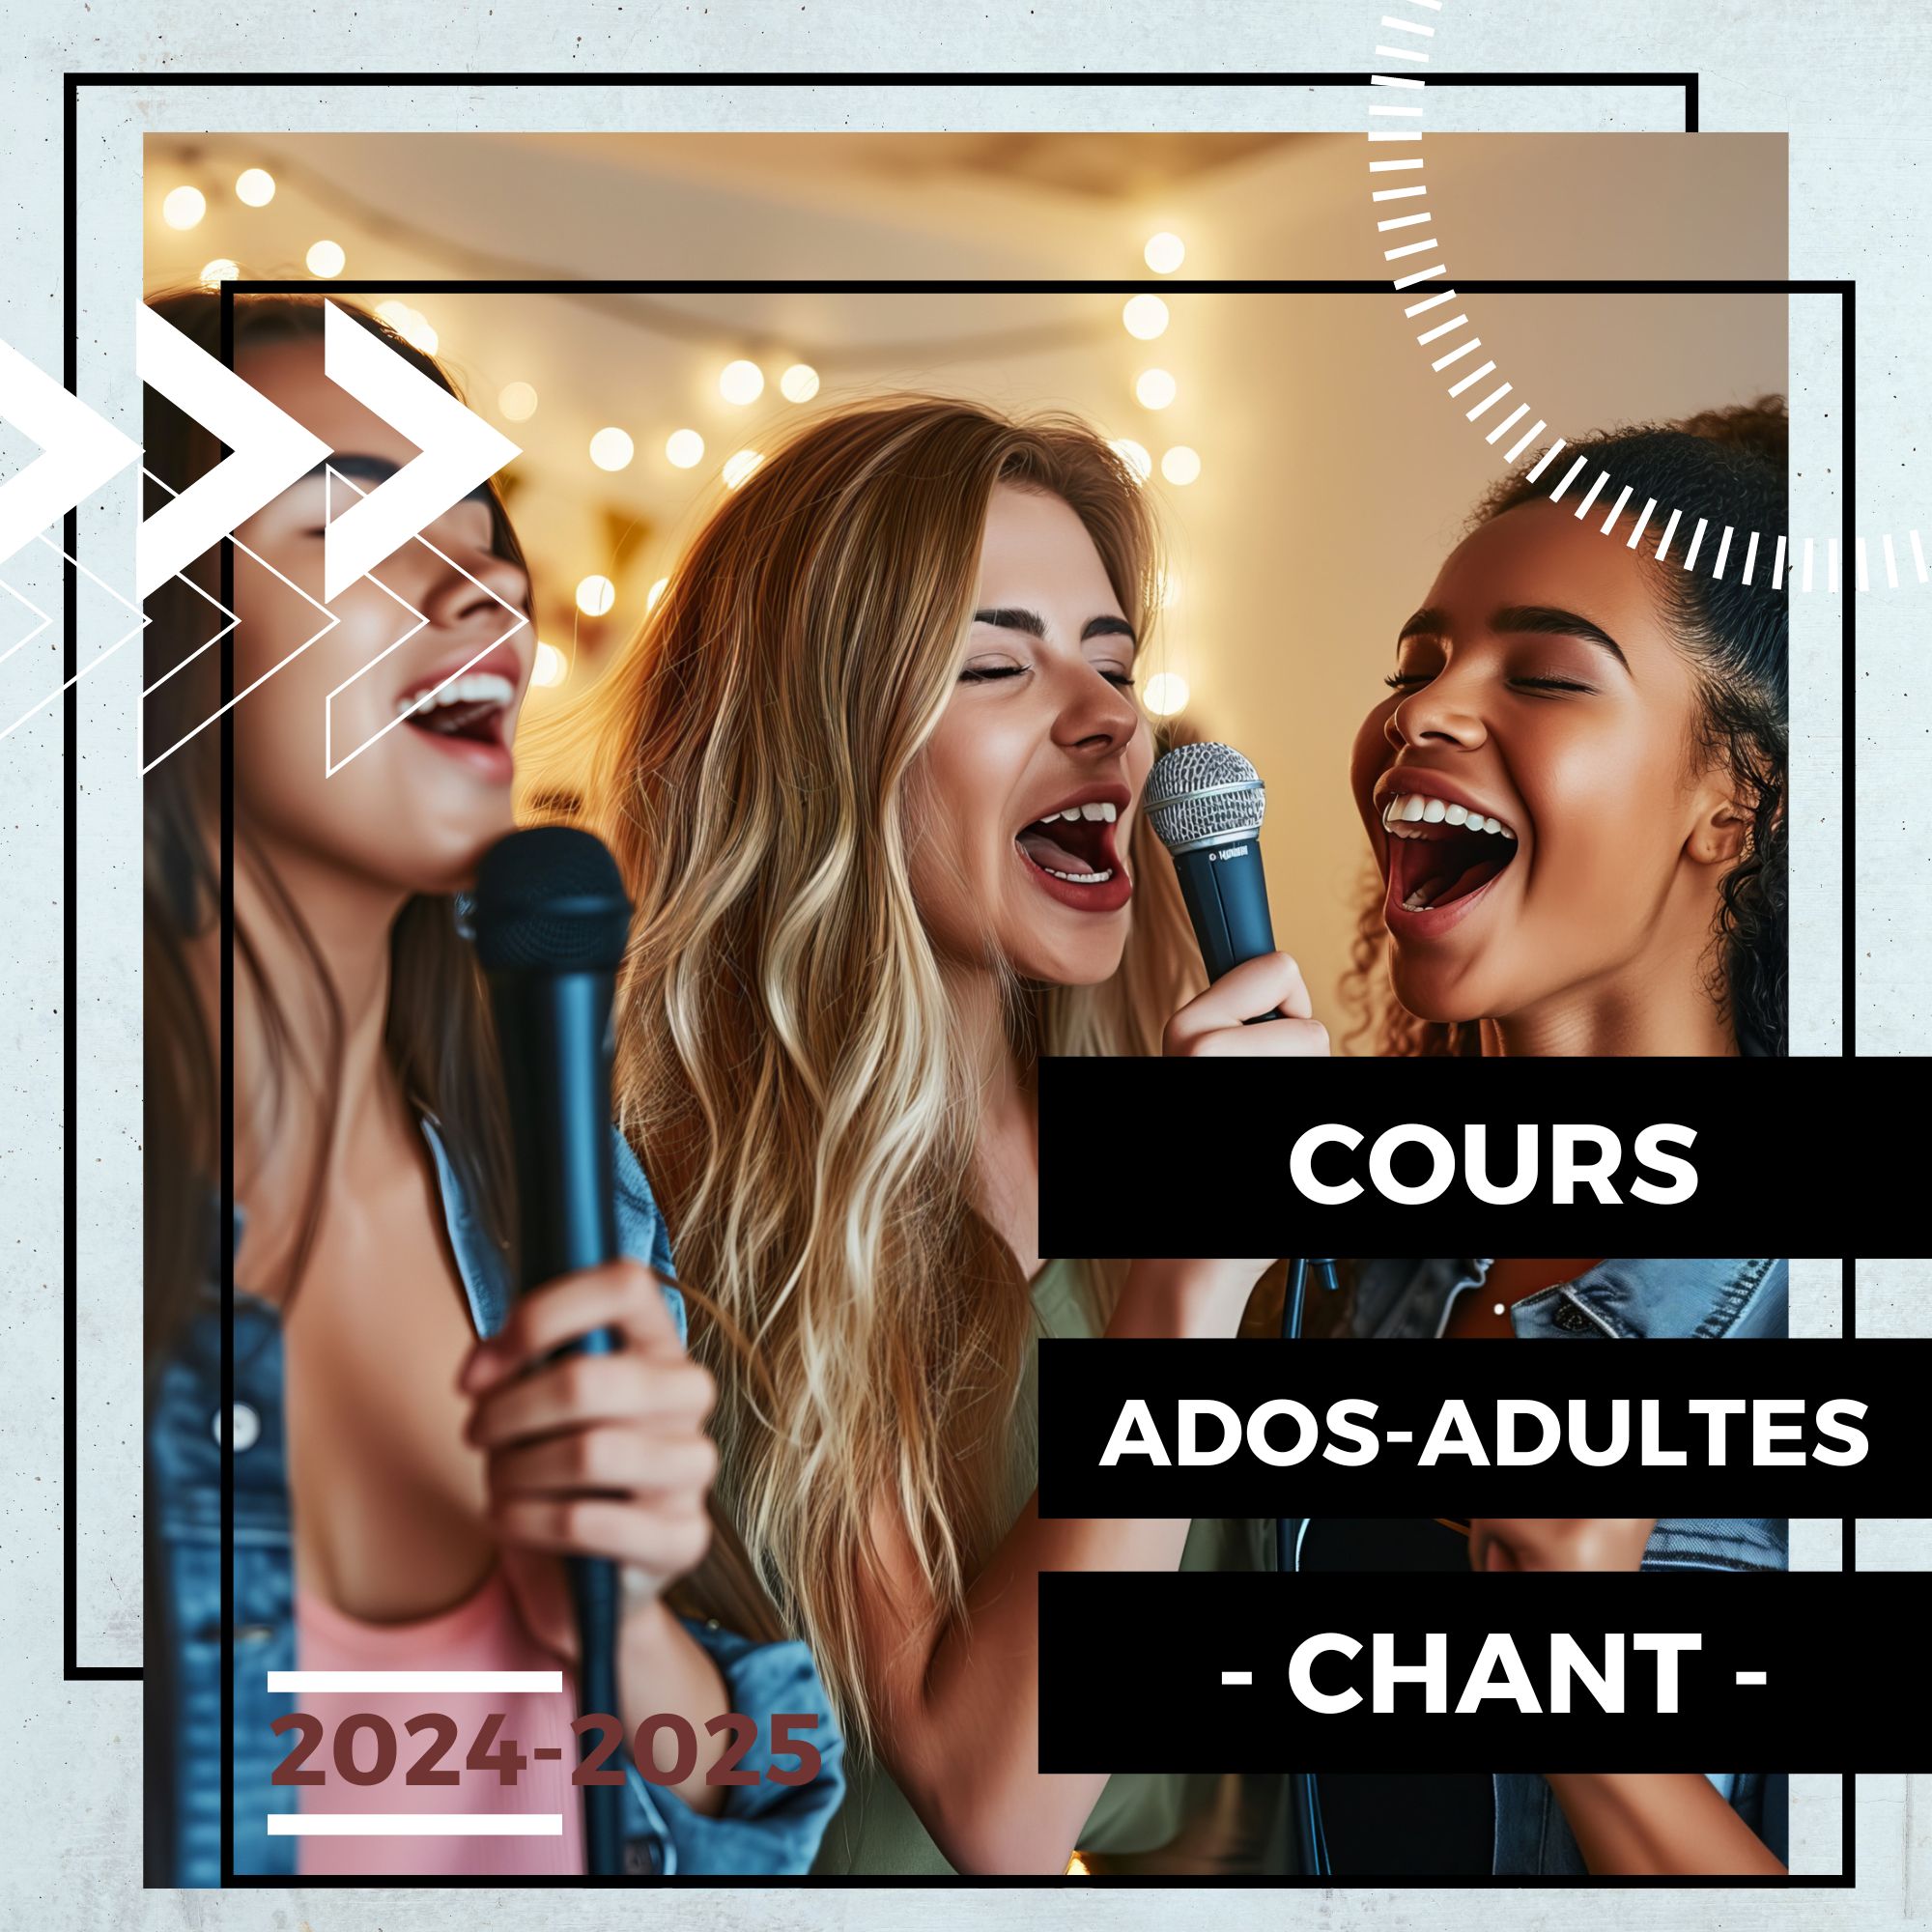 Cours chant ados-adultes